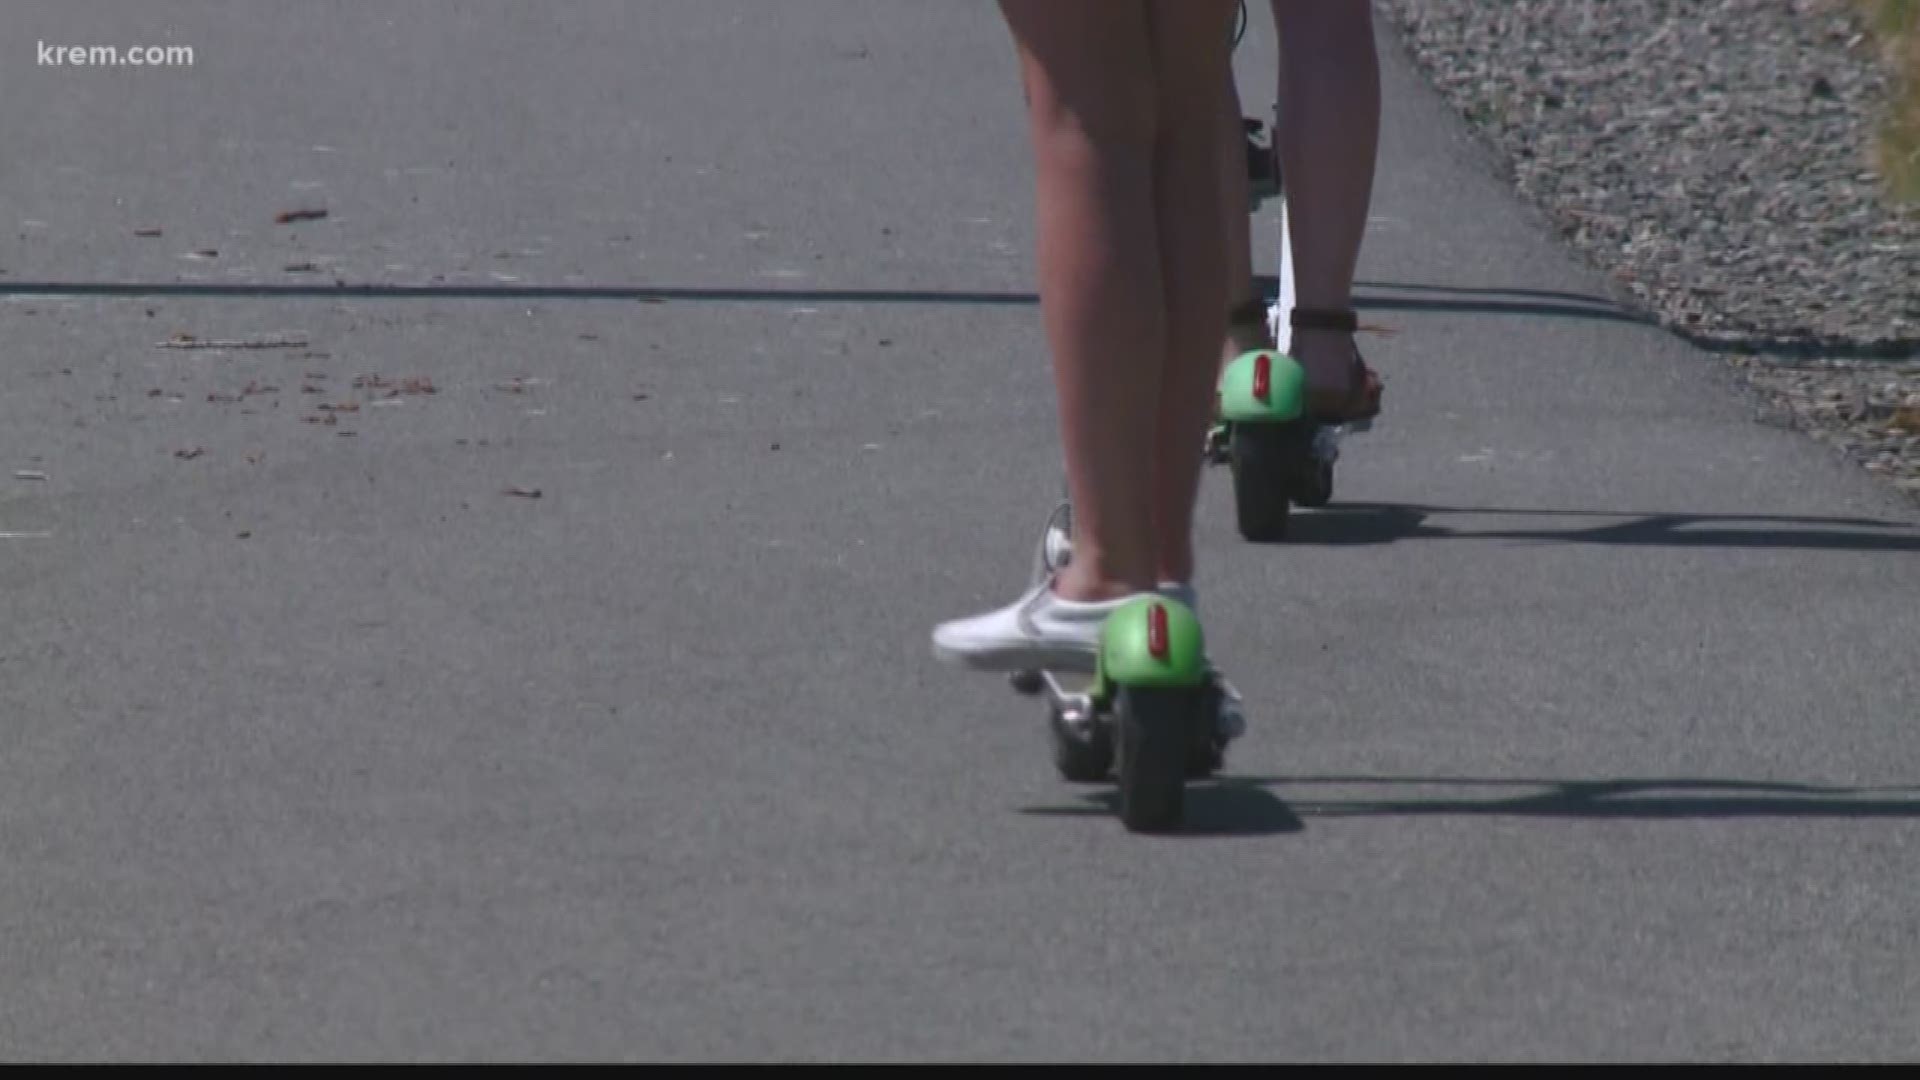 After a night out in Spokane, riding a lime scooter may seem like an inexpensive and convenient option to get home. But can you get a D-U-I while riding a scooter or bike? KREM 2's Amanda Roley asked Spokane Police.